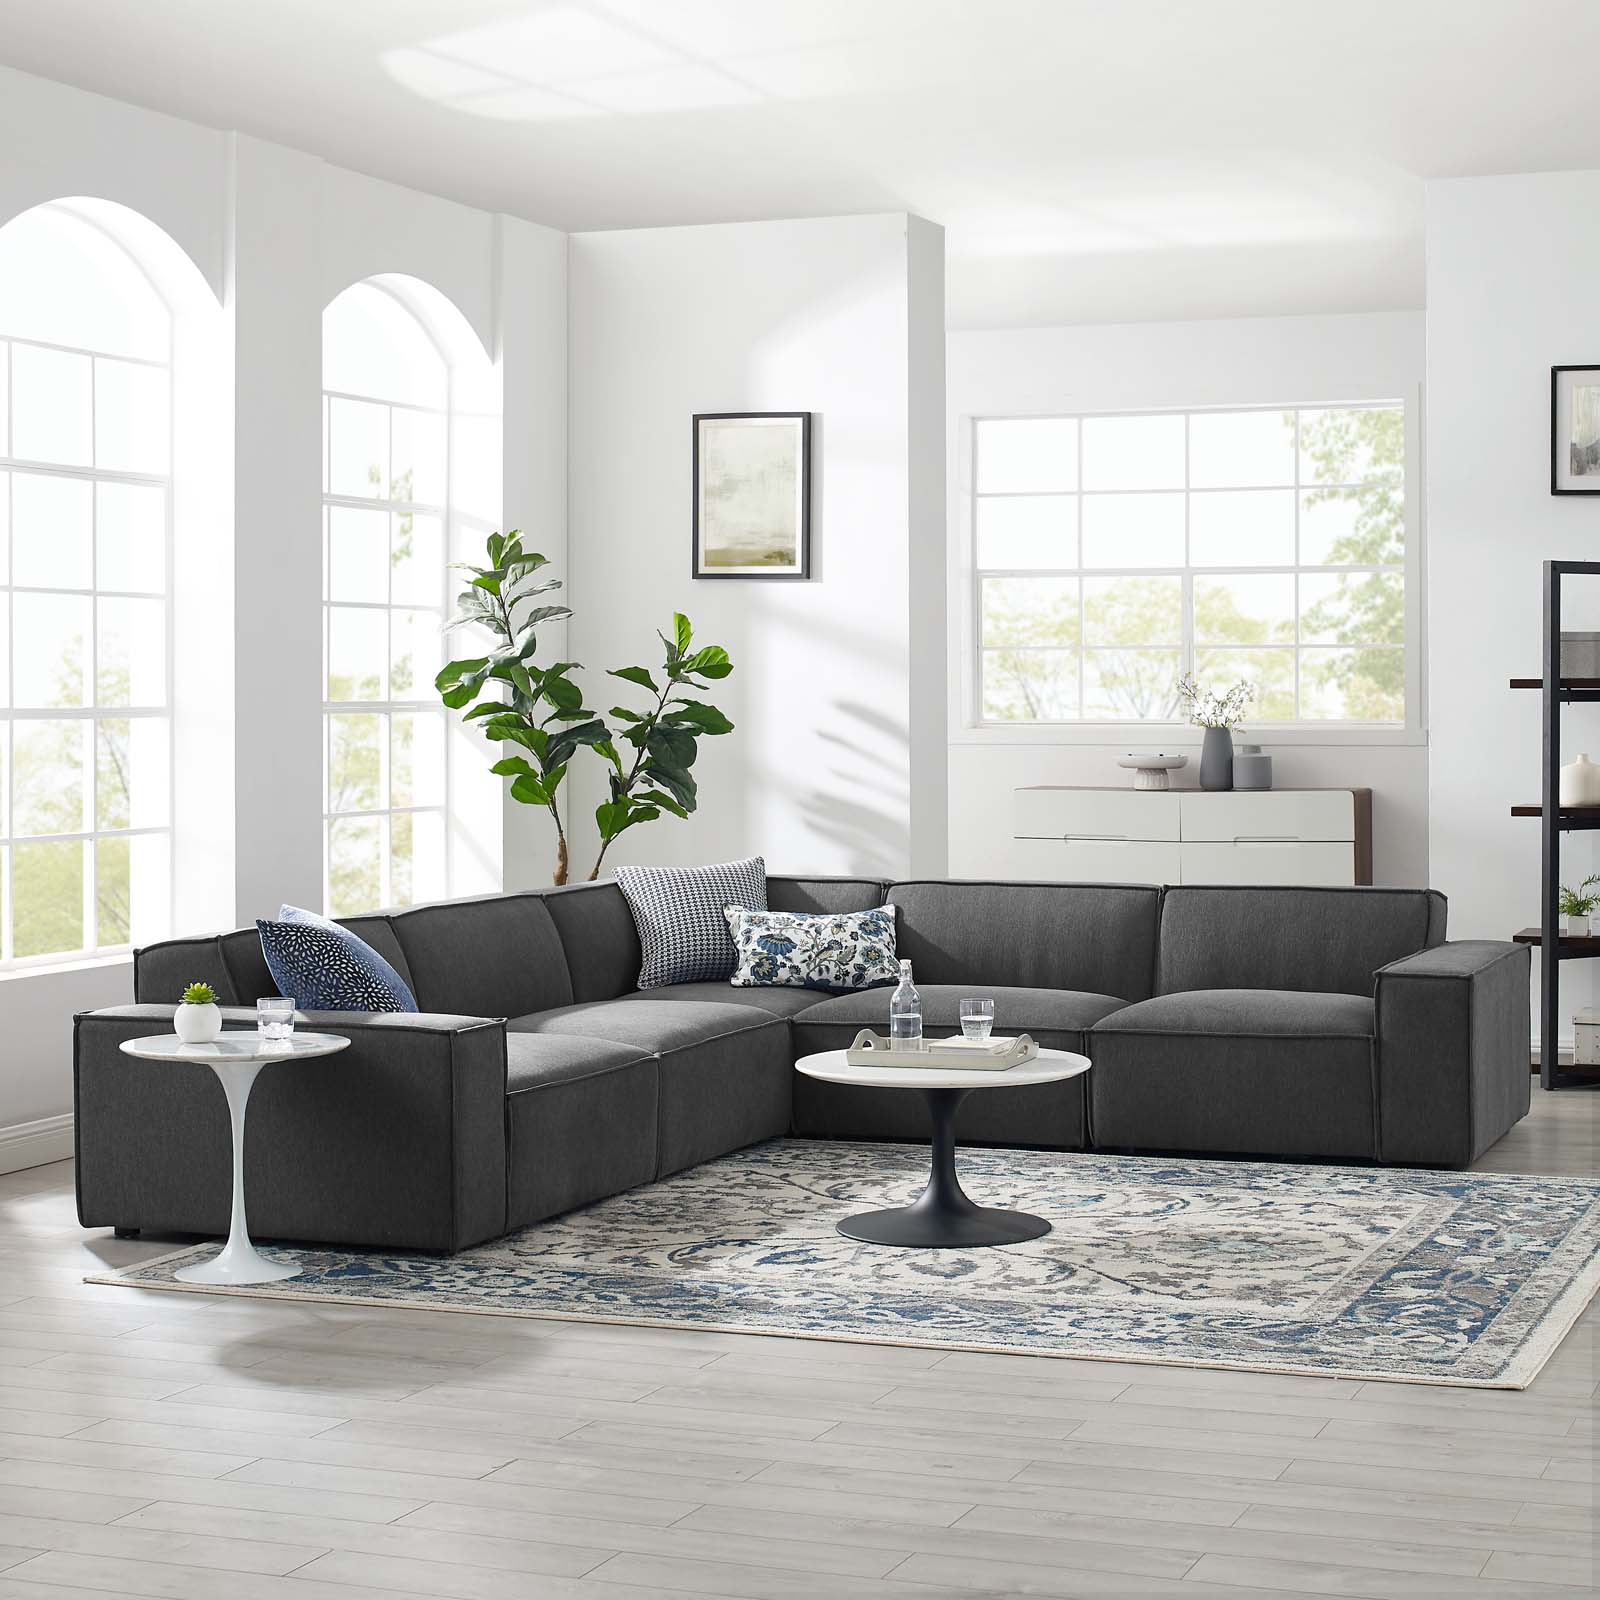 Re 5 Piece Sectional Sofa In